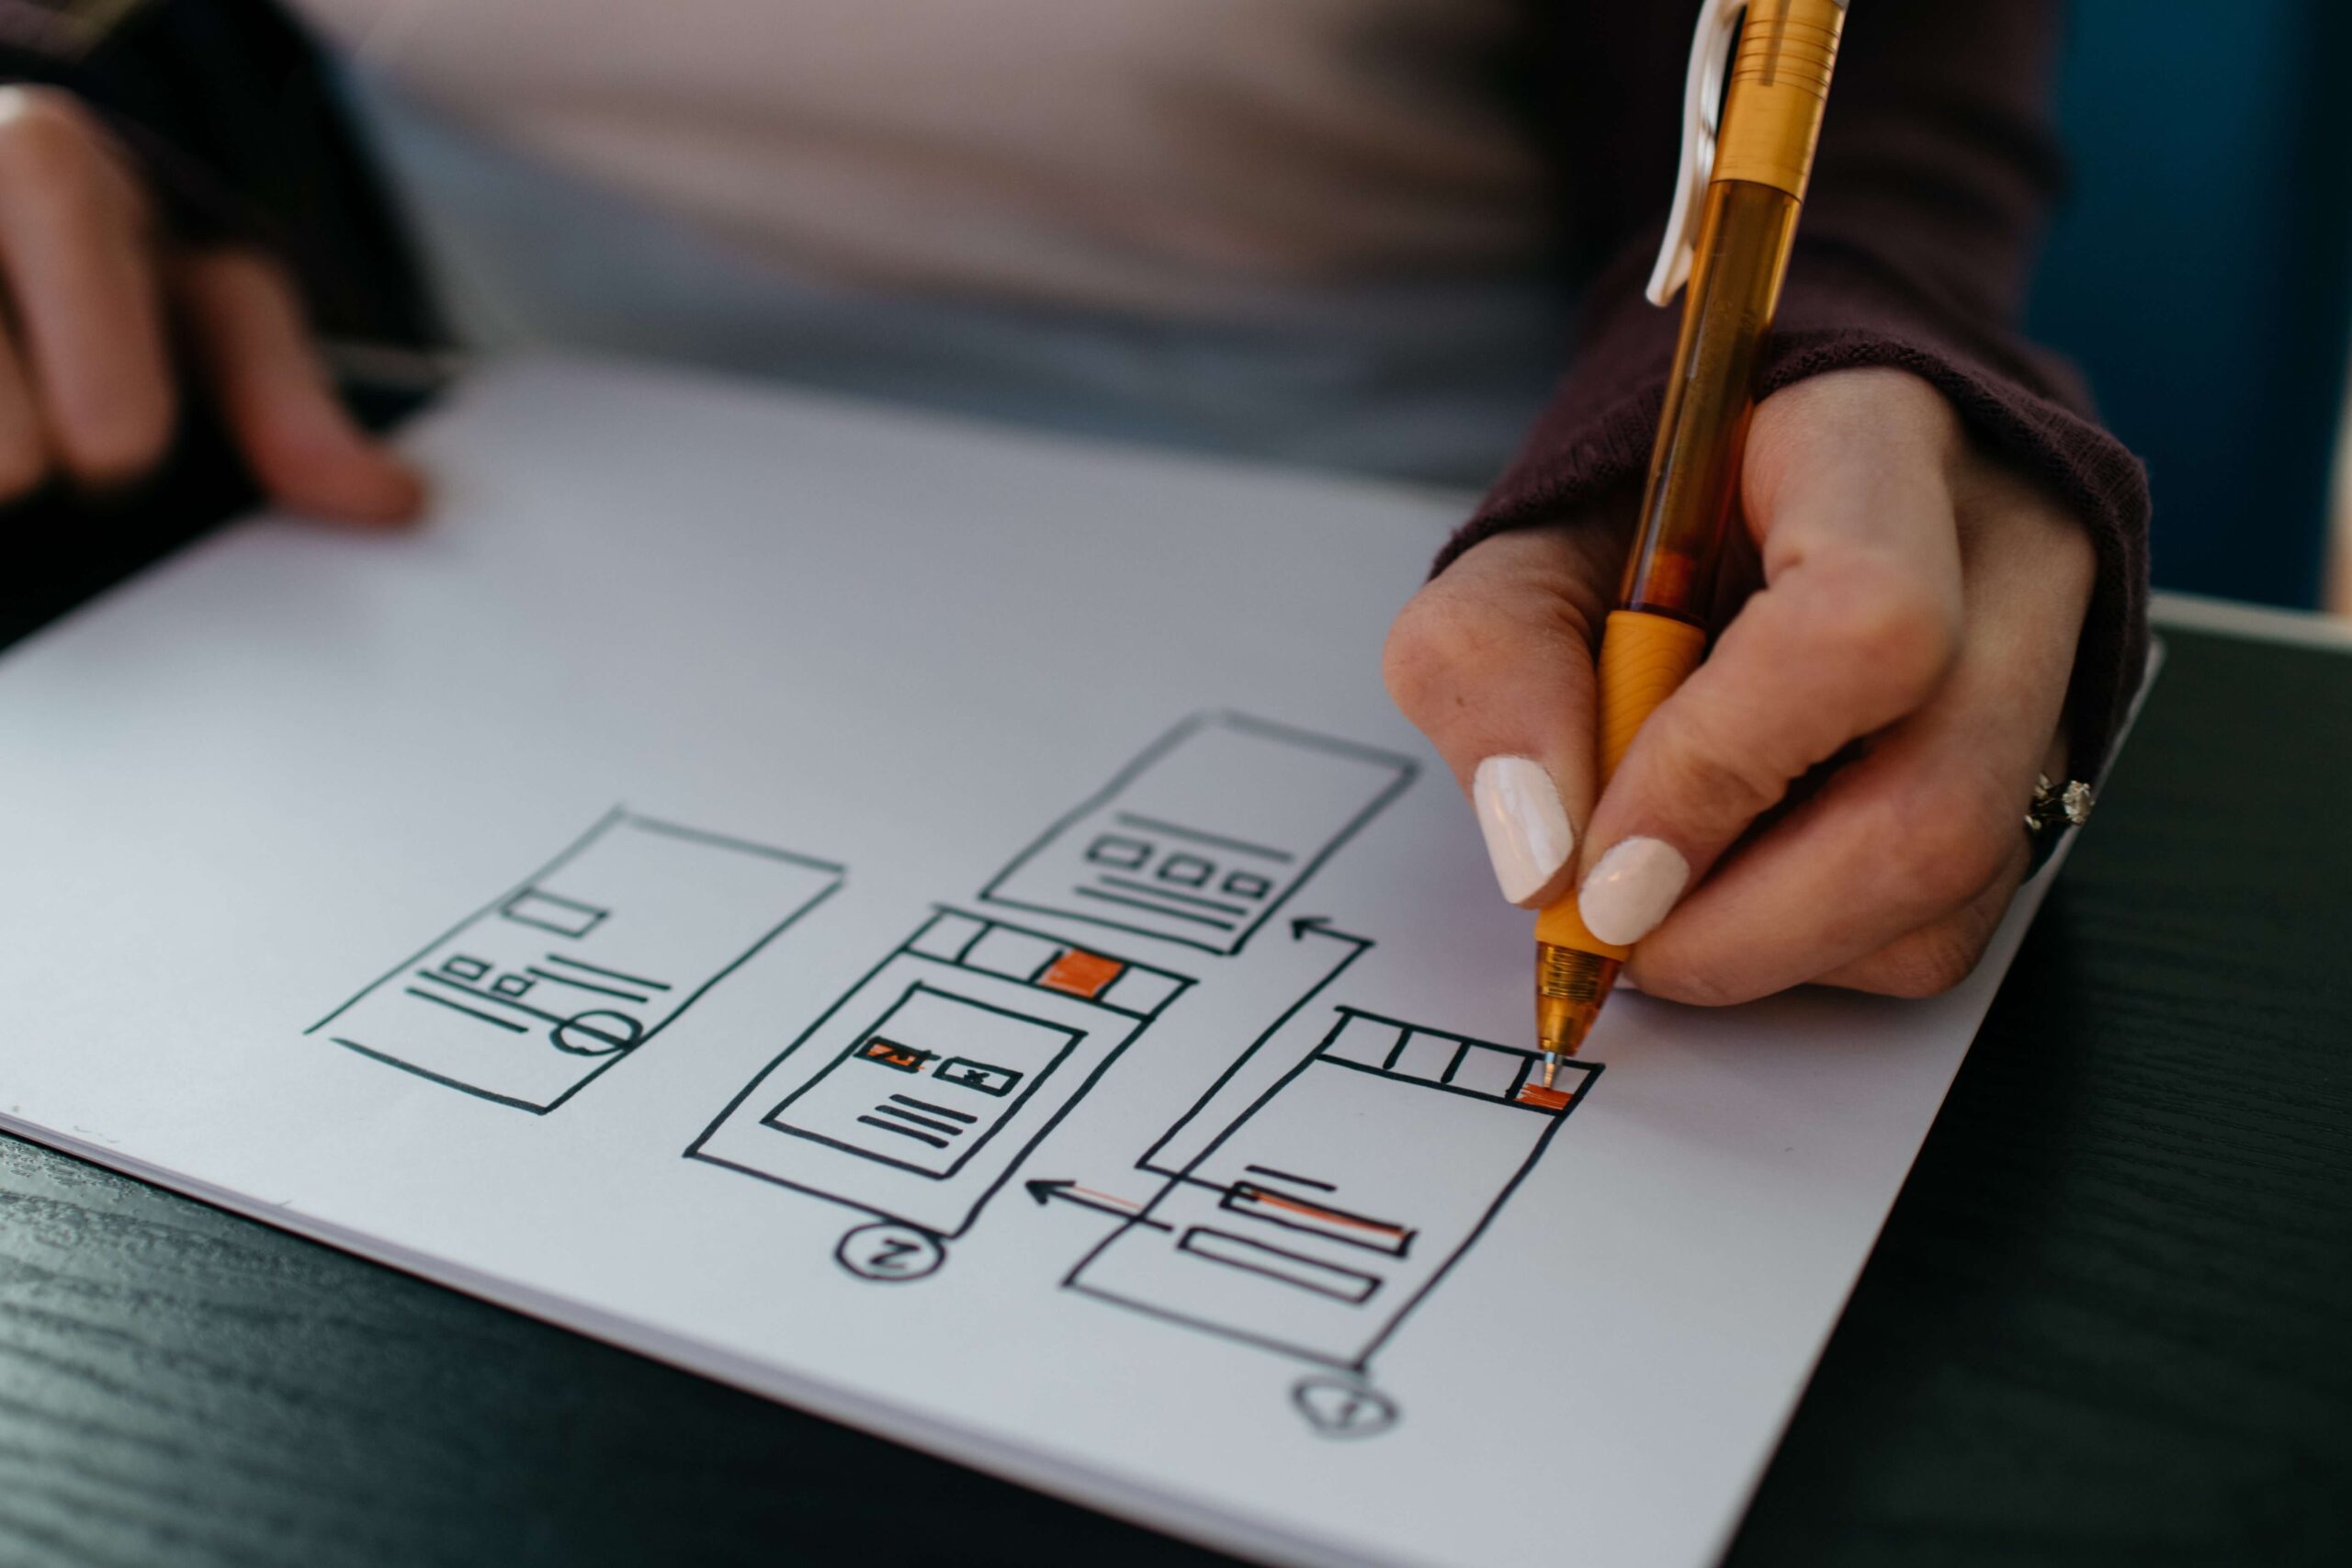 7 Tips for Designing an Effective Website for Your Small Business